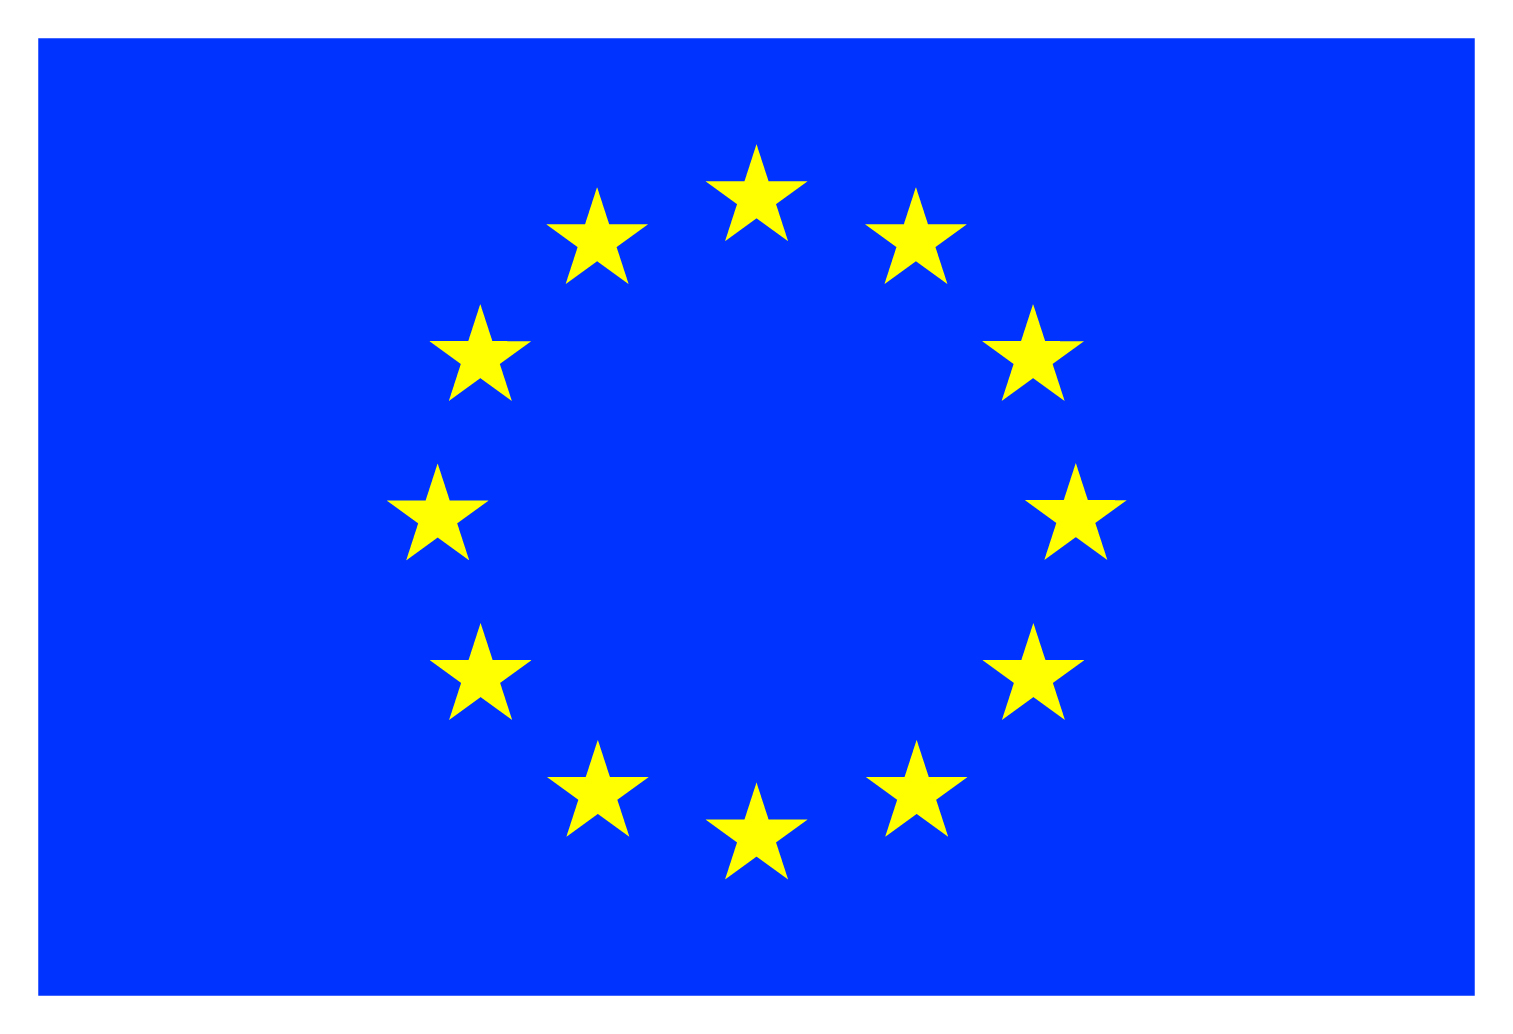 Funded by the Horizon Europe Framework Programme of the European Union